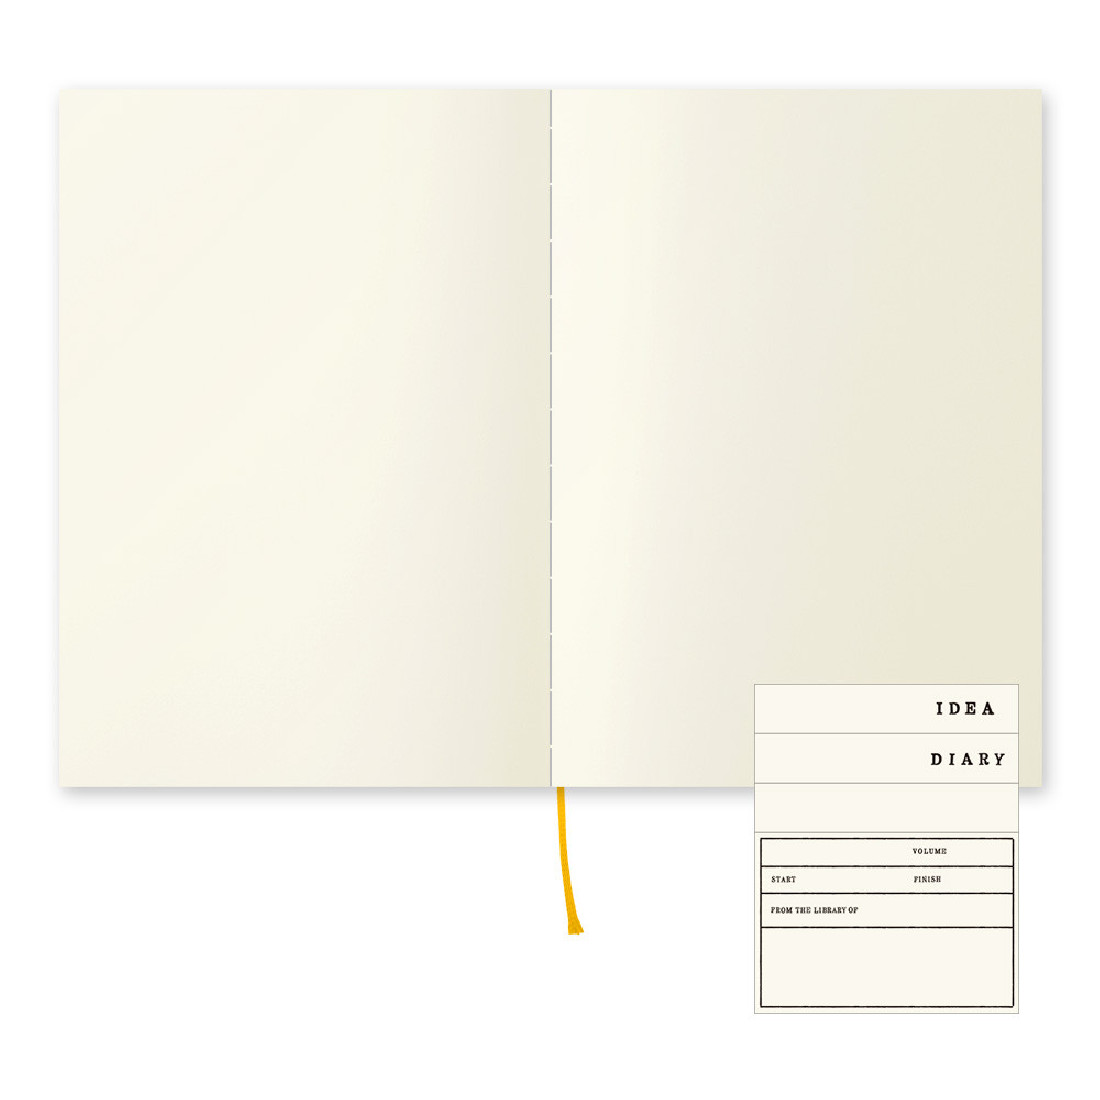 Midori MD Notebook A5 148x210 mm, 176 pages, glassine paper cover, Blank, Bookmark string, Label stickers, Thread-stitched book-binding 15293006